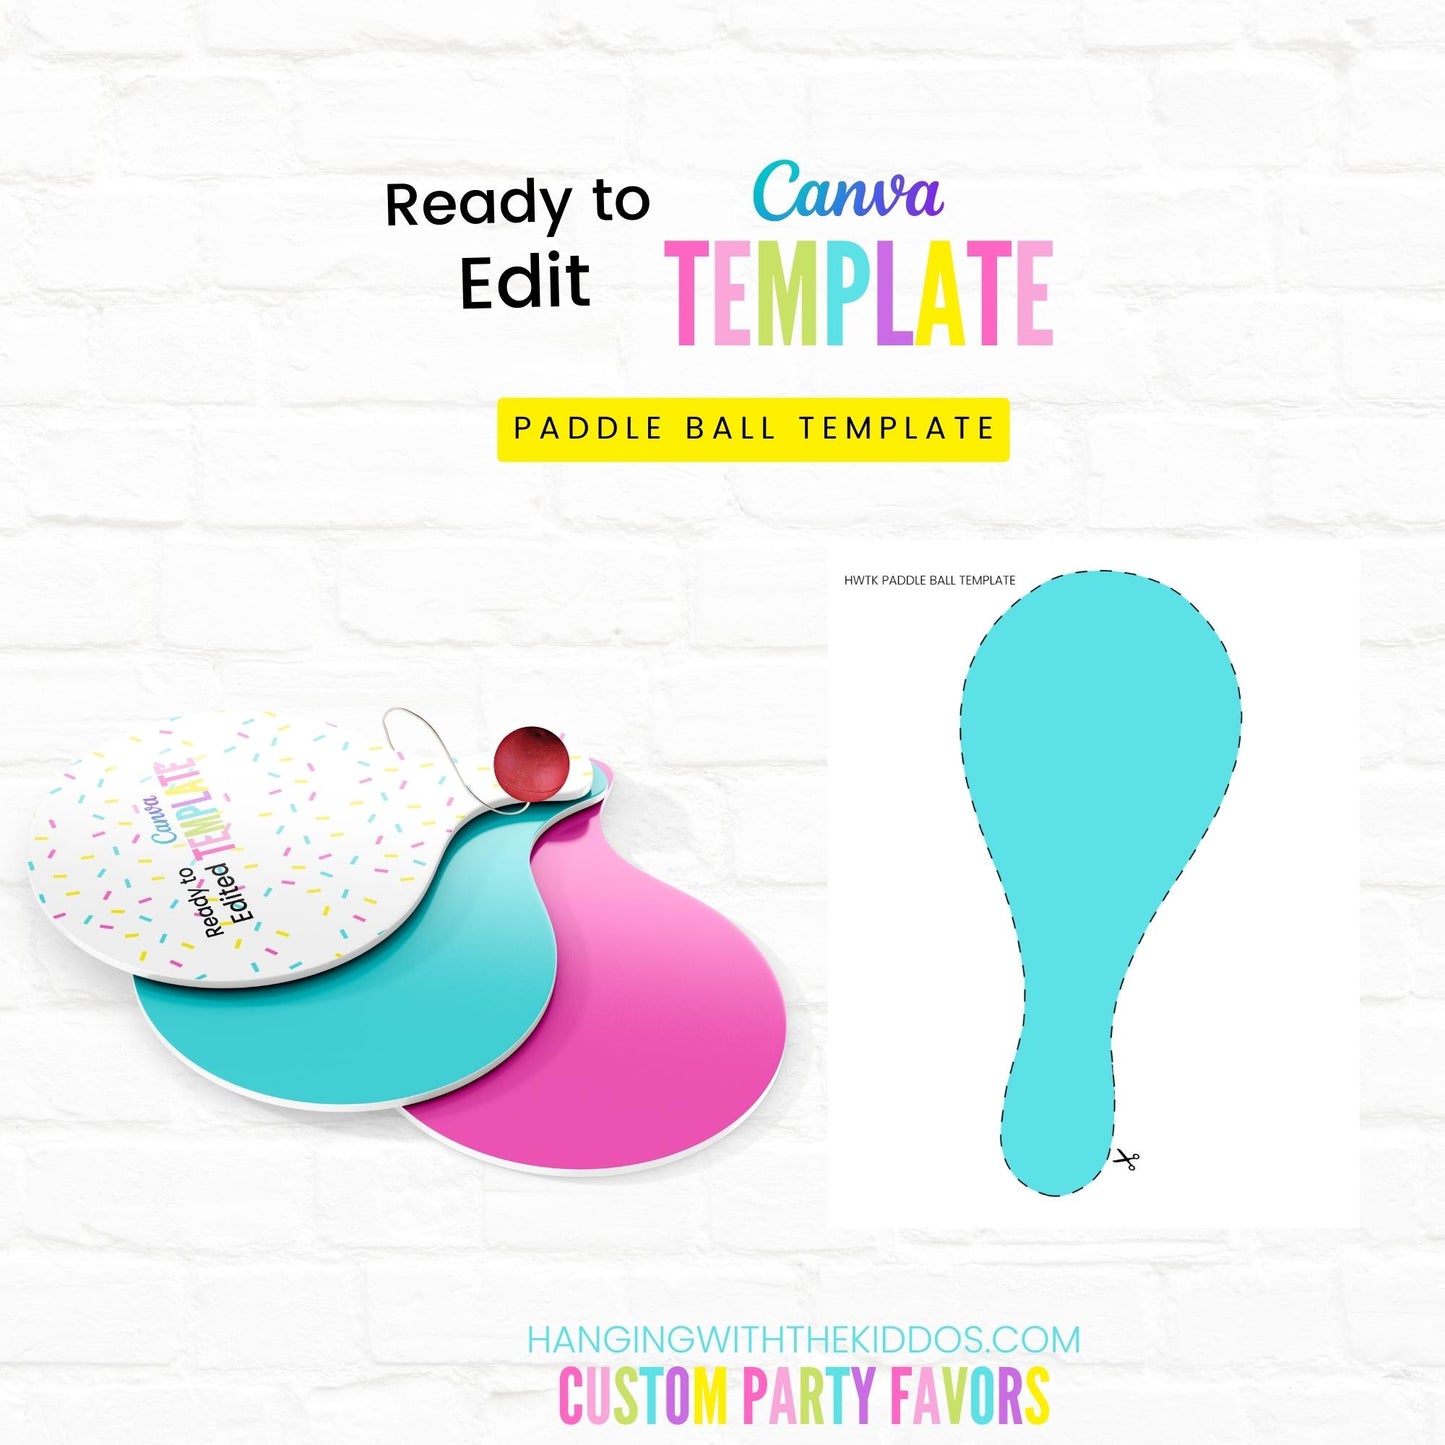 Paddle Ball Template